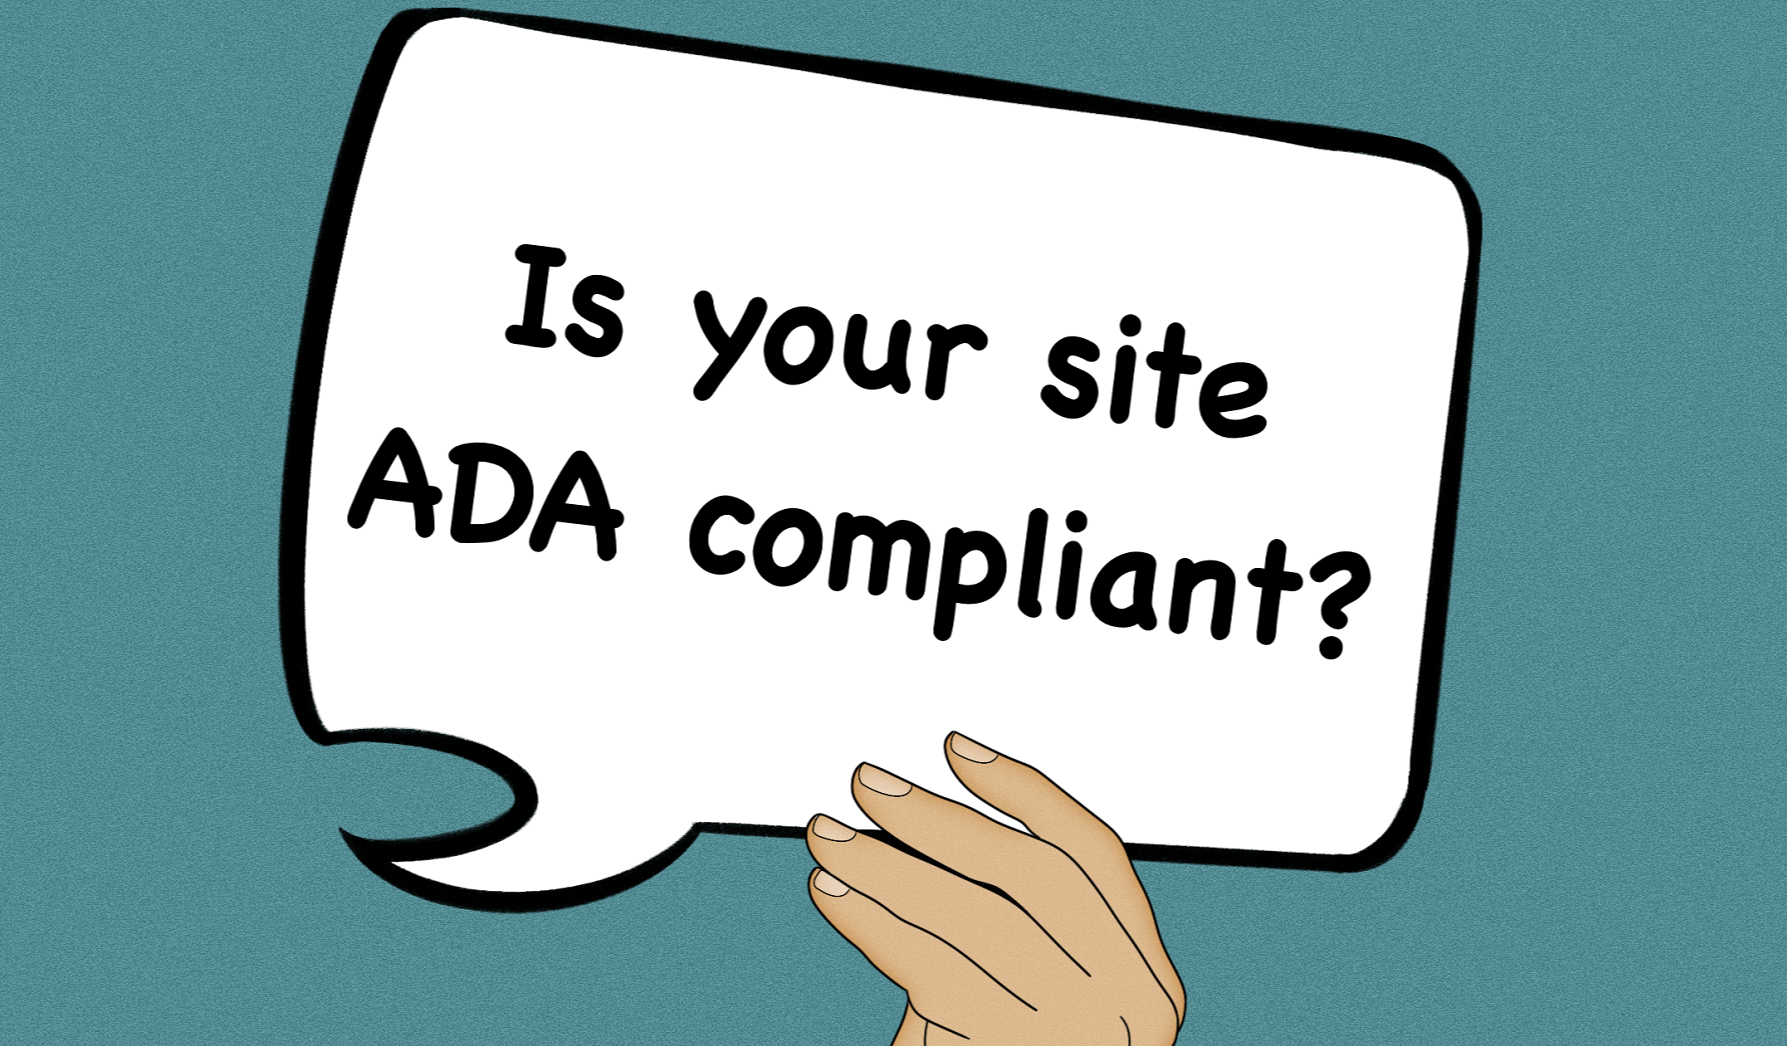 ADA Compliance: what you need to know